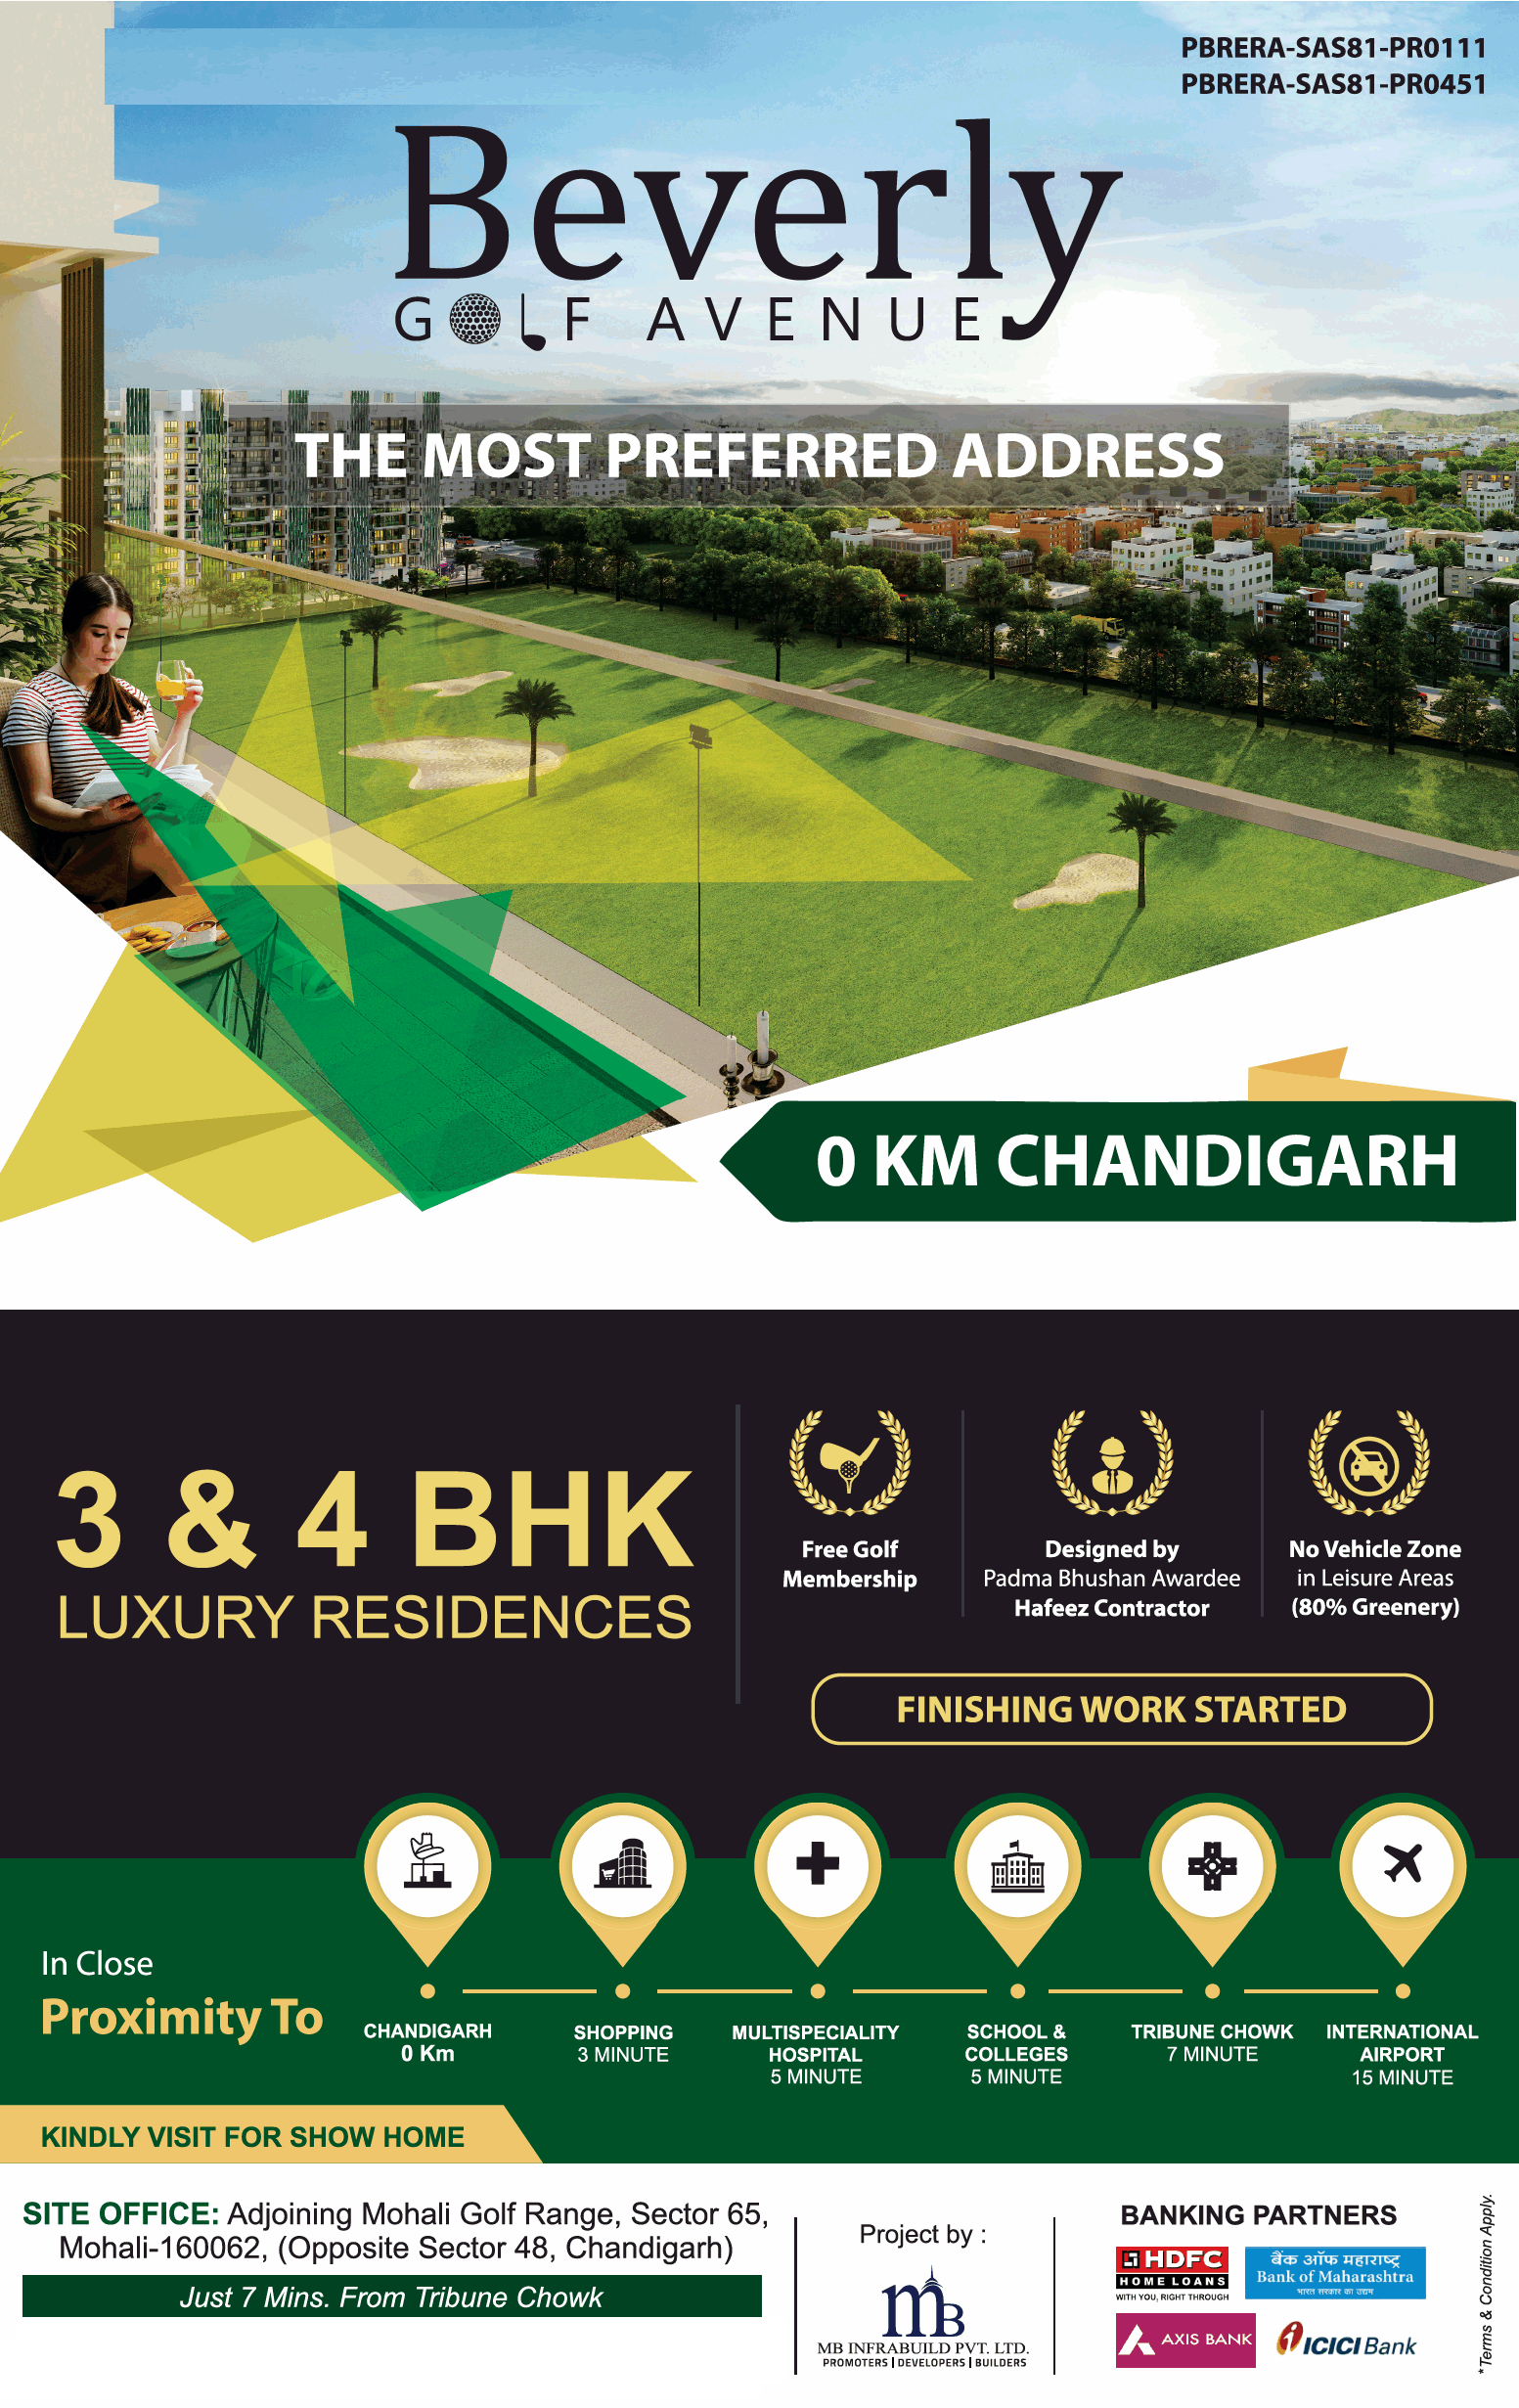 3 and 4 BHK  luxury residences at MB Beverly Golf Avenue,  Mohali